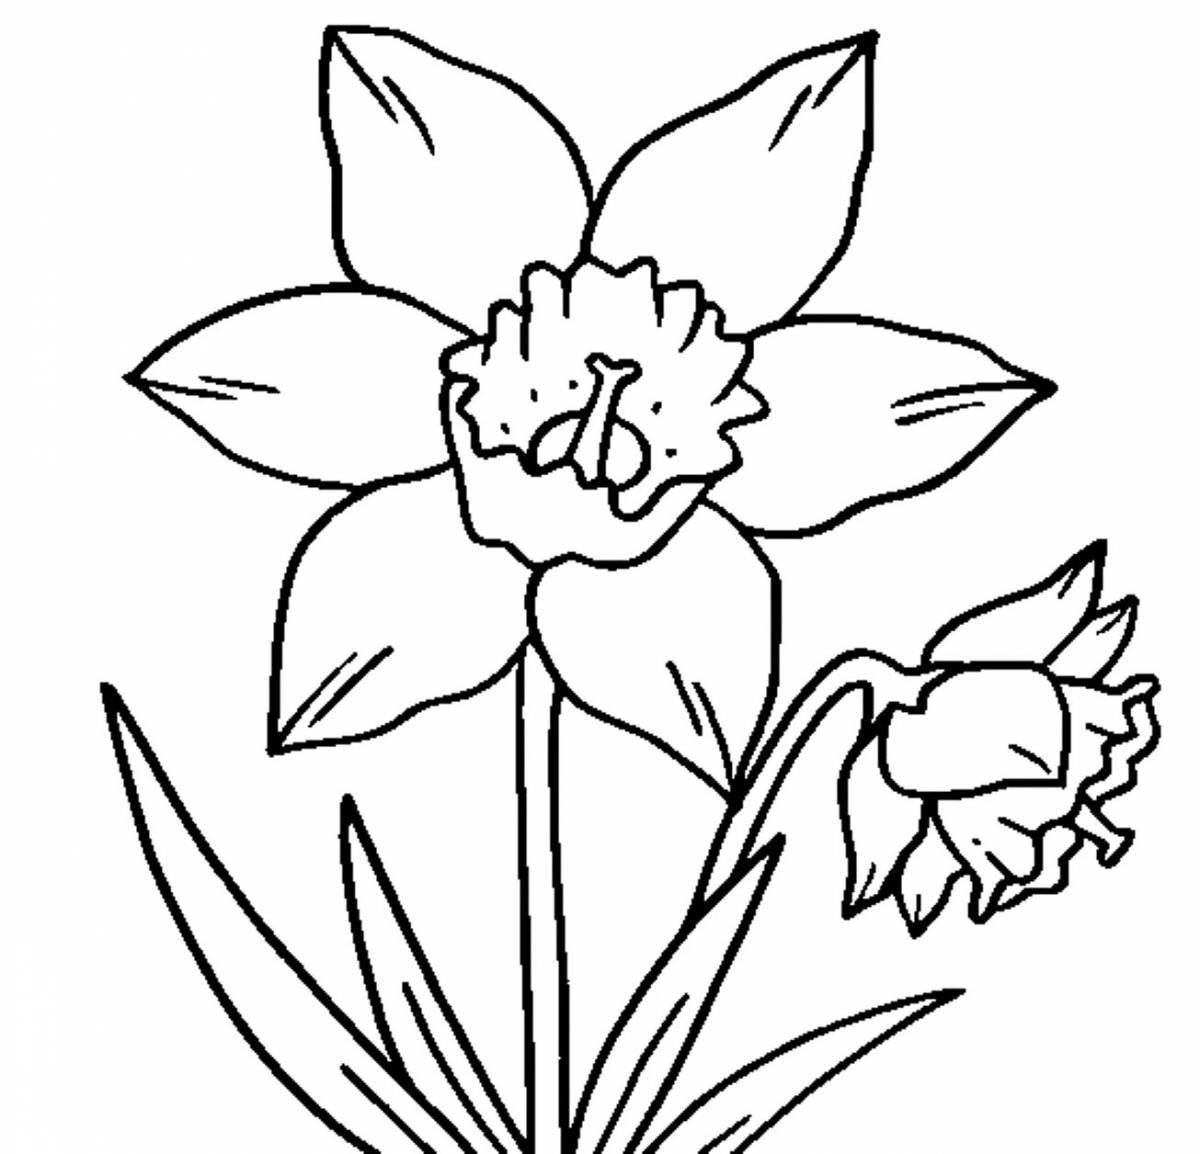 Colorful lazoric flower coloring page